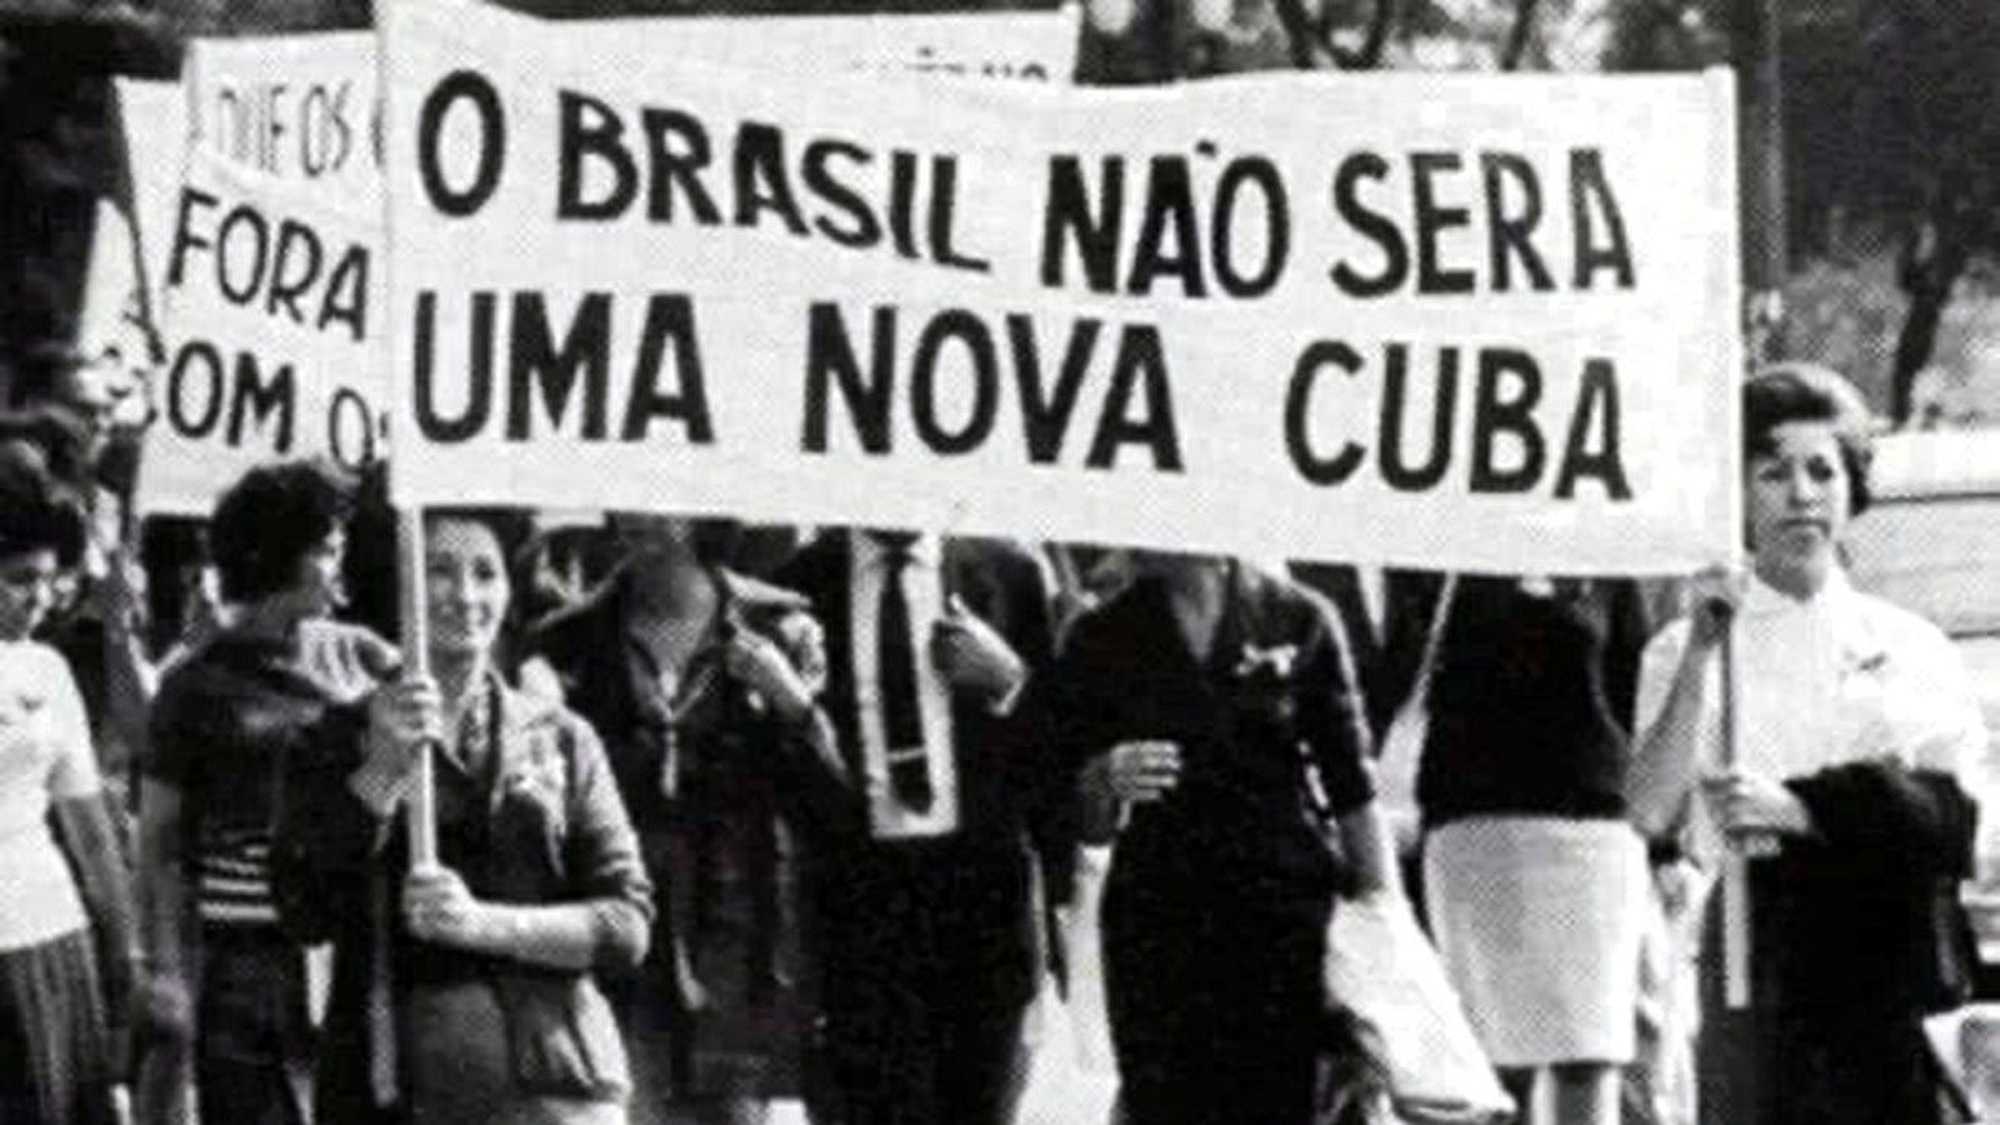 Protest against the communist threat in Brazil in the 1960s - Wikimedia Commons / Public Domain